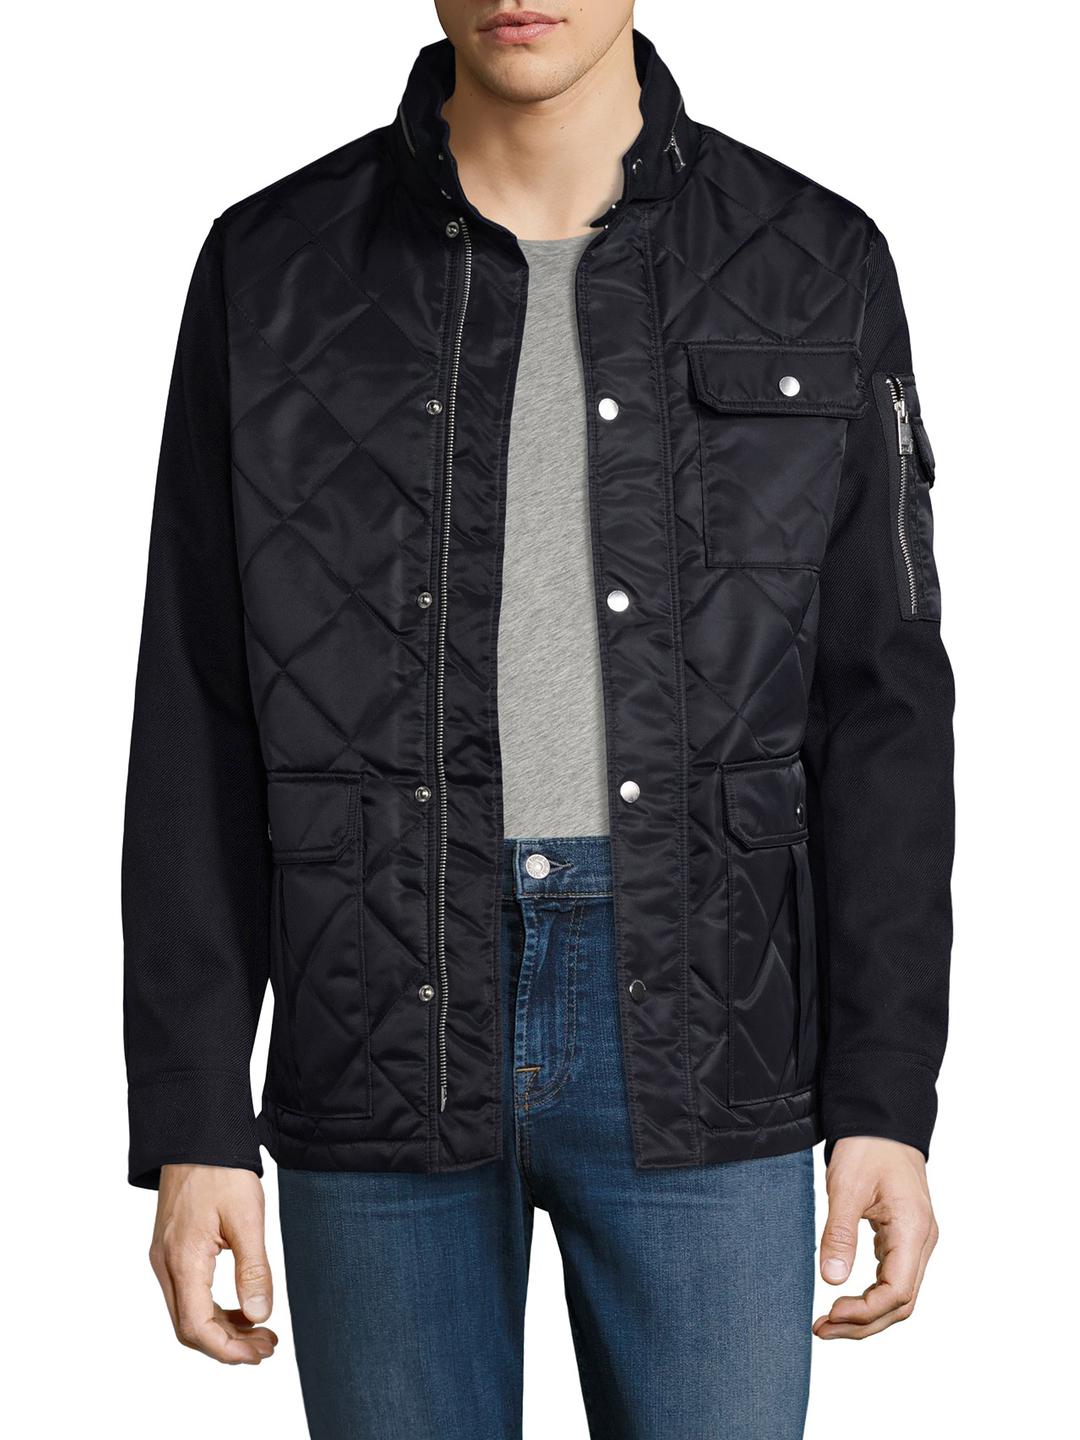 Armani Exchange Quilted Caban Coat in Navy (Blue) for Men - Lyst